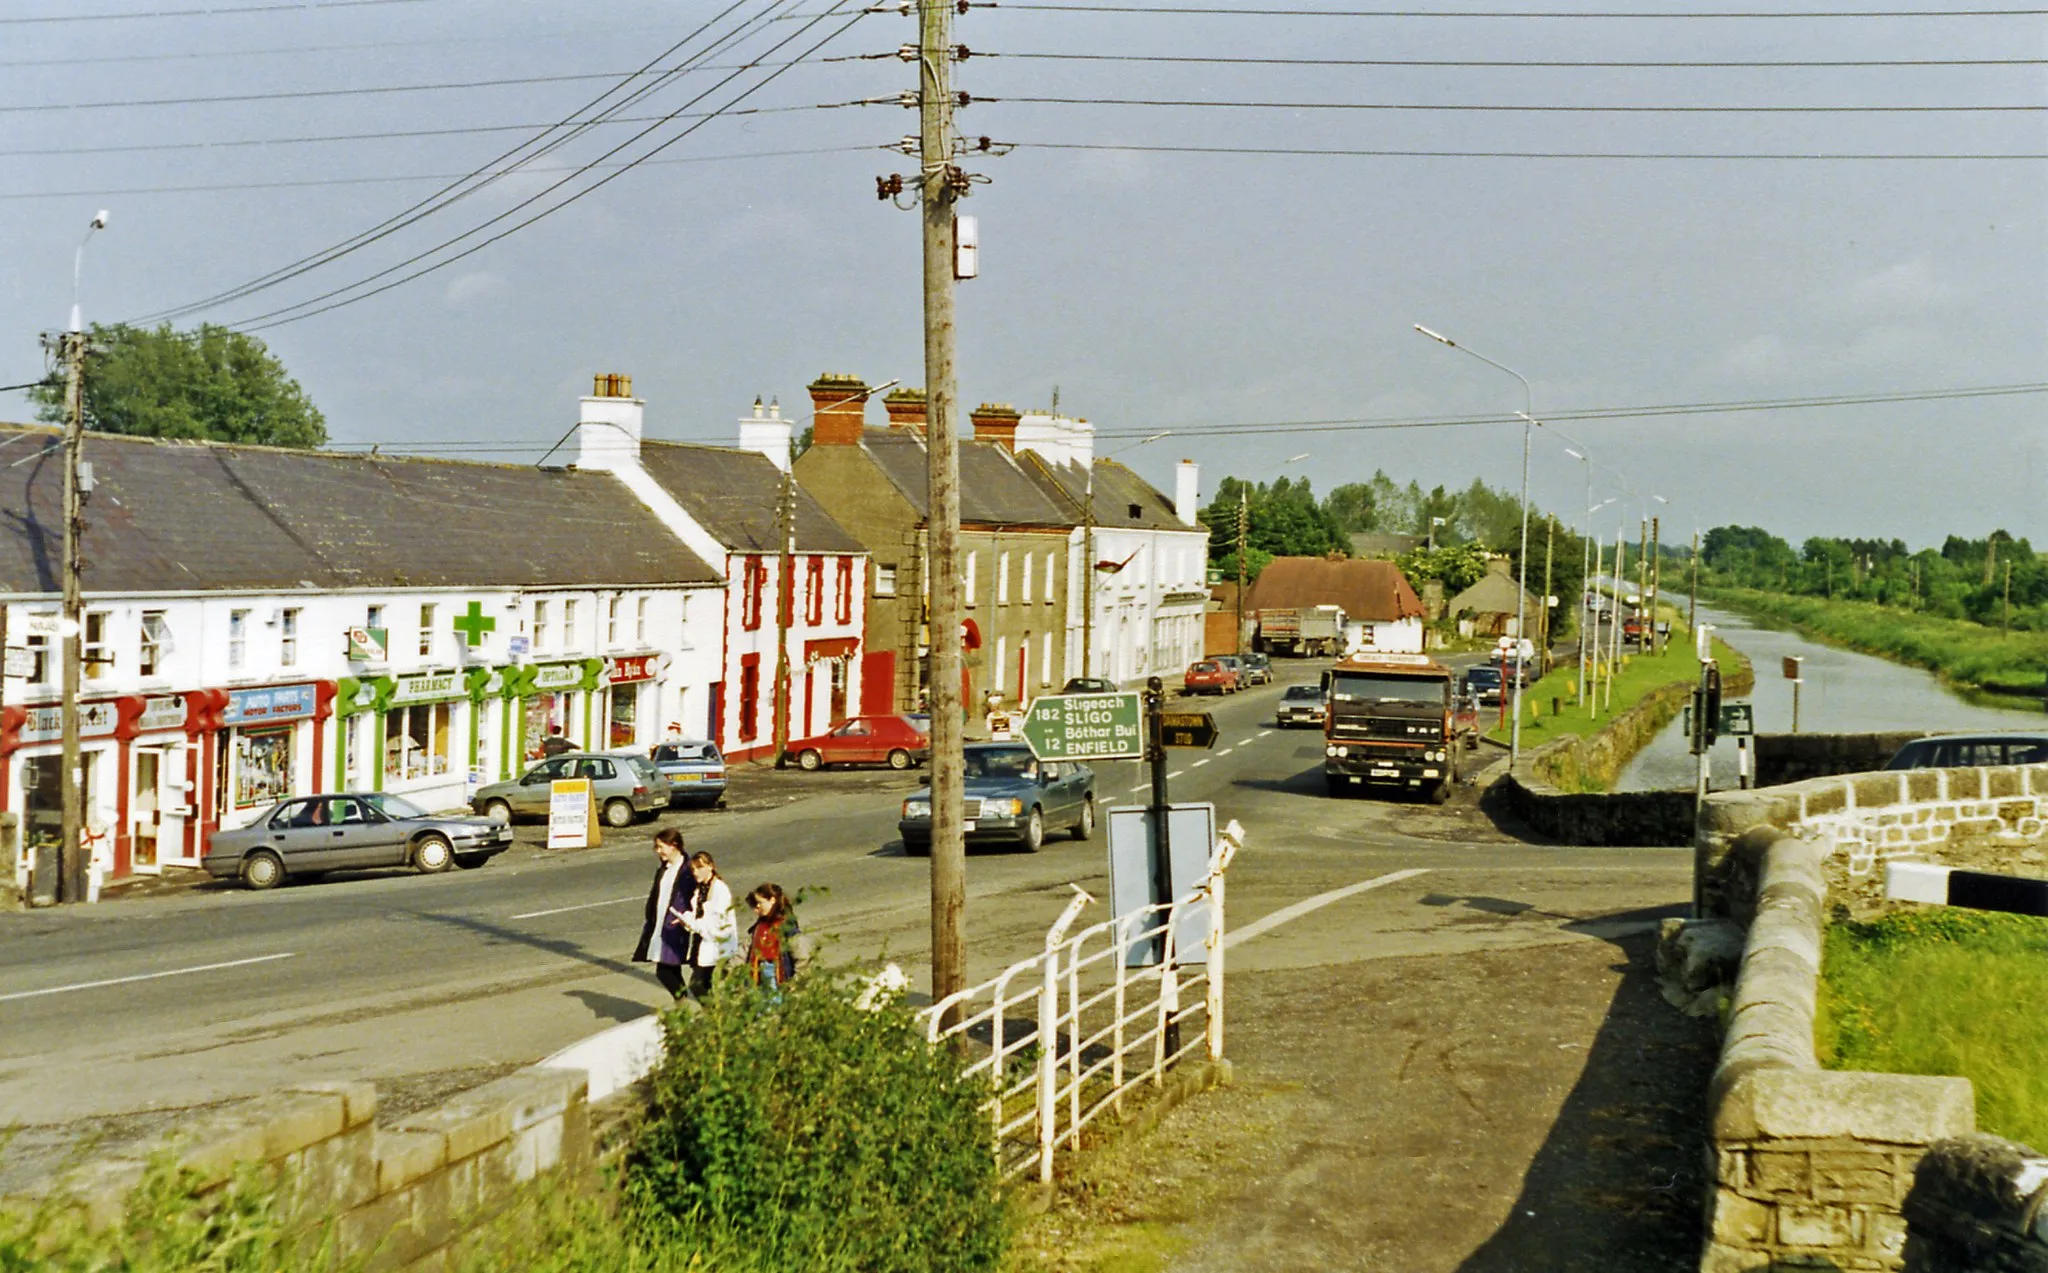 Photo showing: Leaving Kilcock on N4, the main road to Dublin.
View eastward, towards Maynooth and Dublin. On the right is the Royal Canal, which runs from the River Shannon at Termonberry, near Longford (Co. Westmeath) all the way to Dublin, and here forms the boundary between Cos. Meath and Kildare. (Note the lock-gate beams on the right). (This was before the M4 motorway was built).